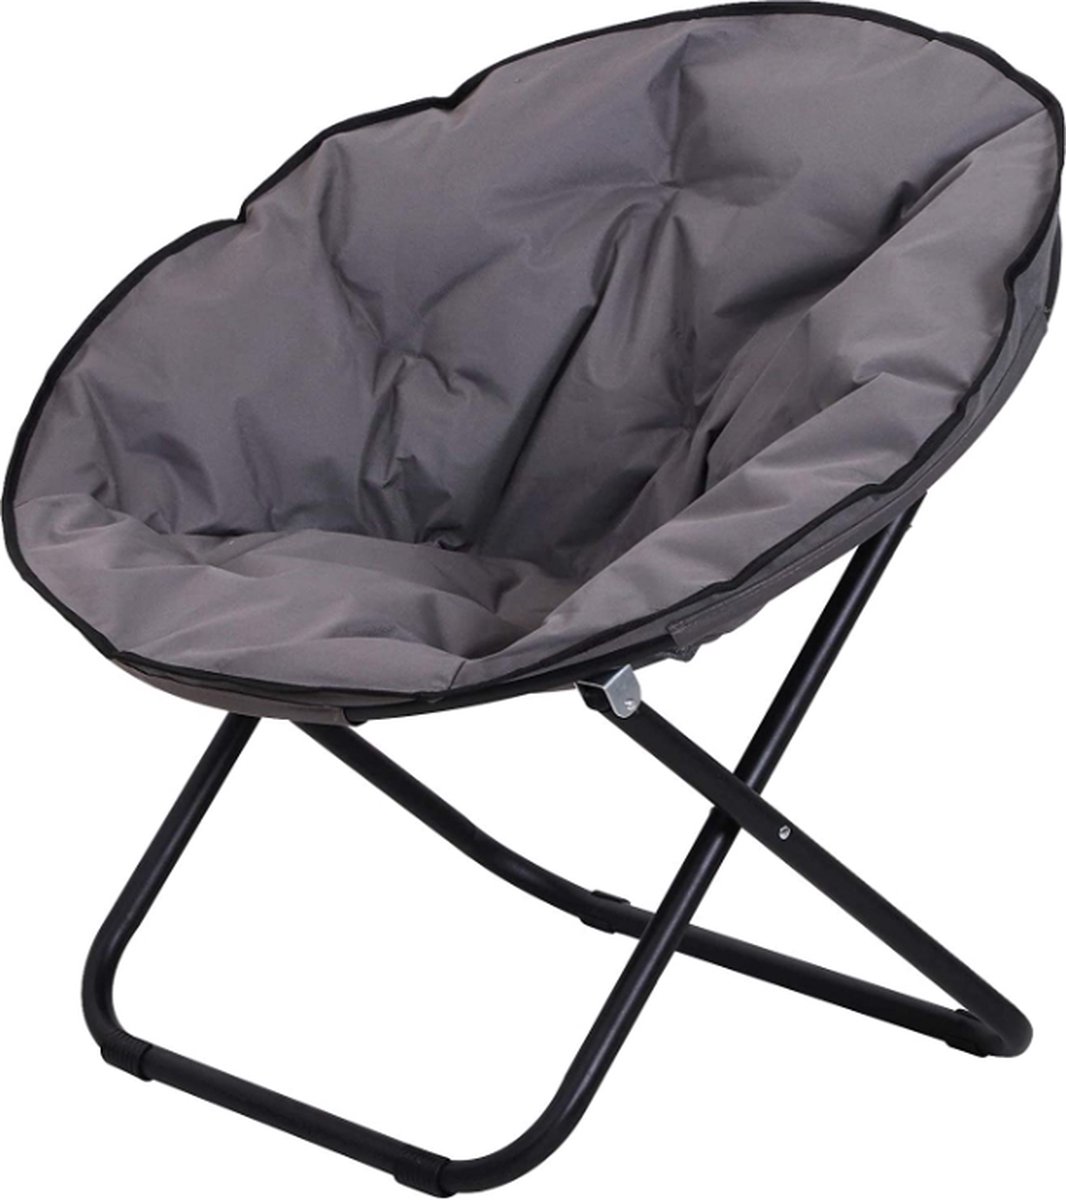 CGPN - folding armchair folding chair camping chair garden chair upholstered chair lounge chair foldable metal + oxford fabric grey 80 x 80 x 75 cm